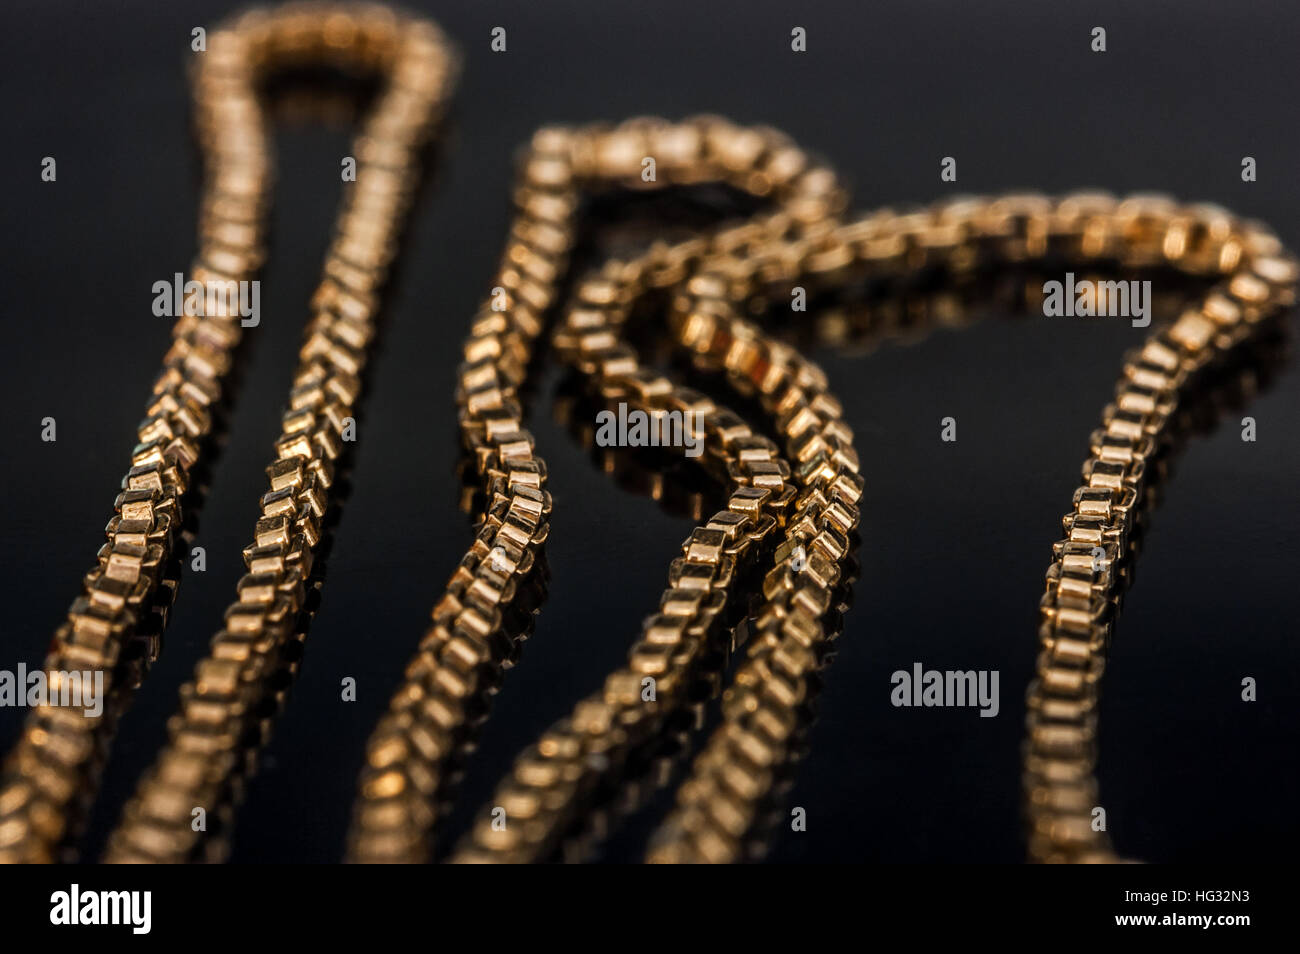 Gold necklace chain closeup jewellery reflecting on glass table Stock Photo